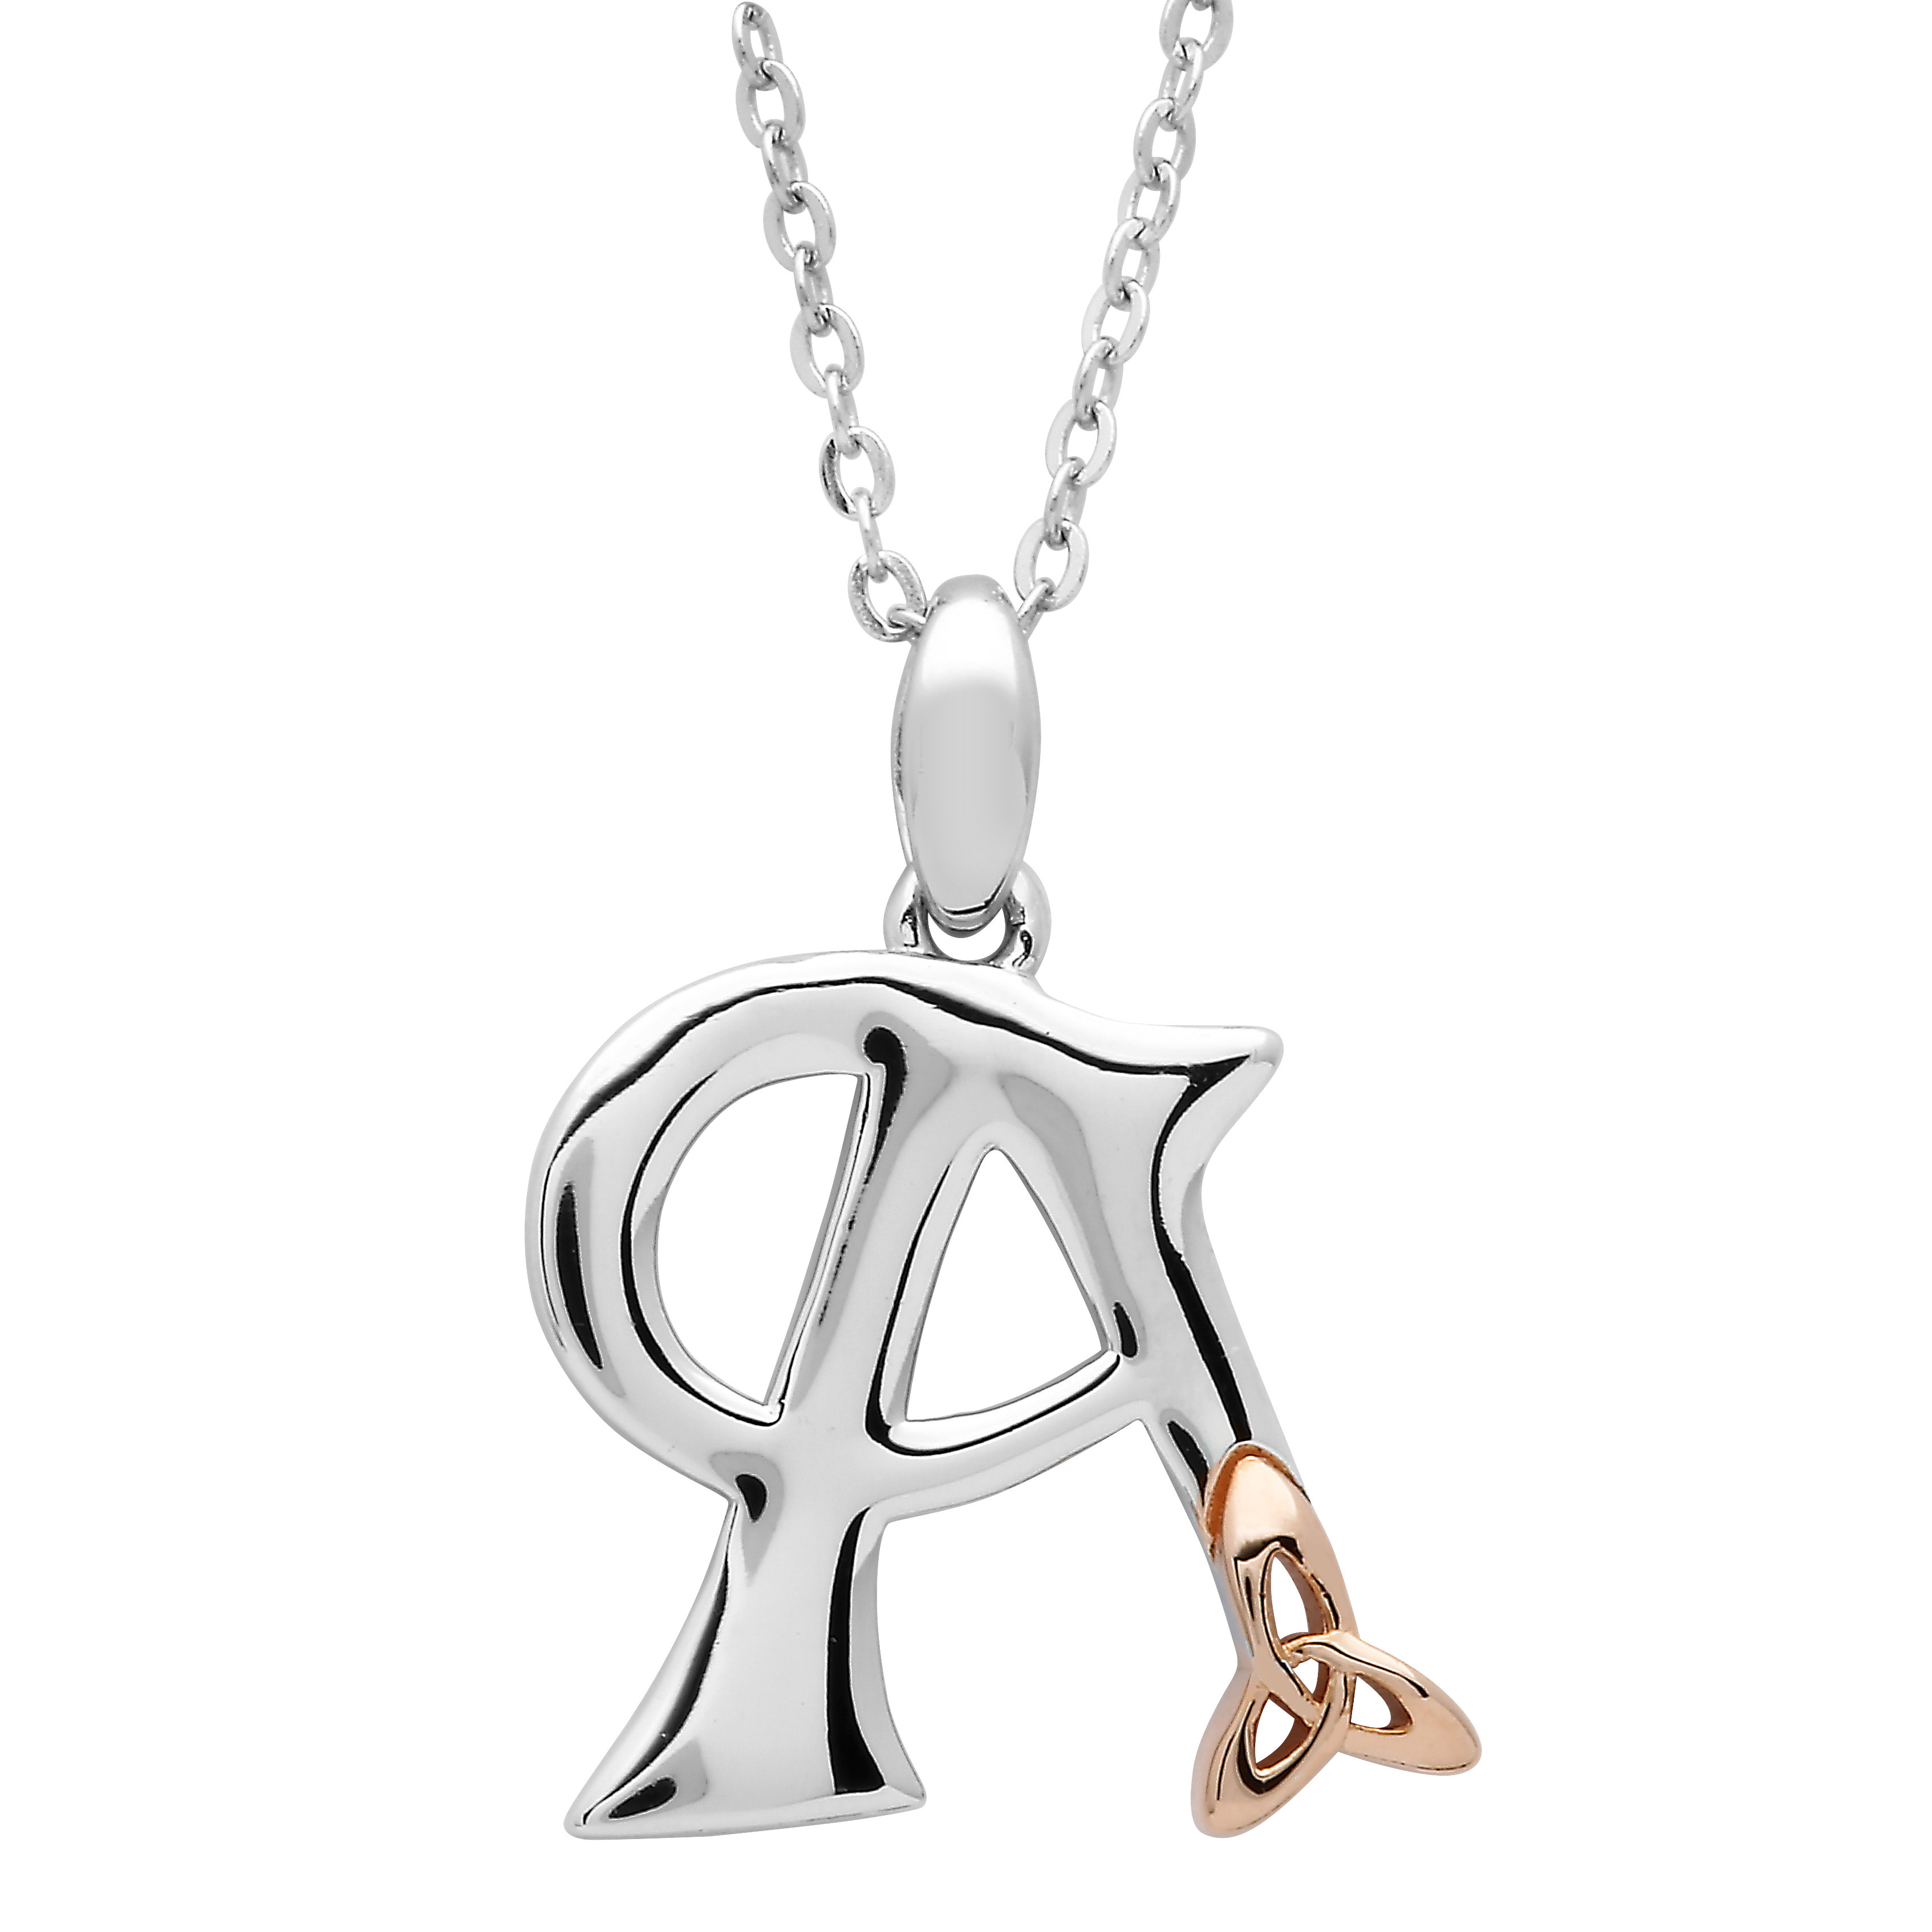 Product image for Irish Necklace | Celtic Initial Sterling Silver & Rose Gold Plated Trinity Knot Pendant